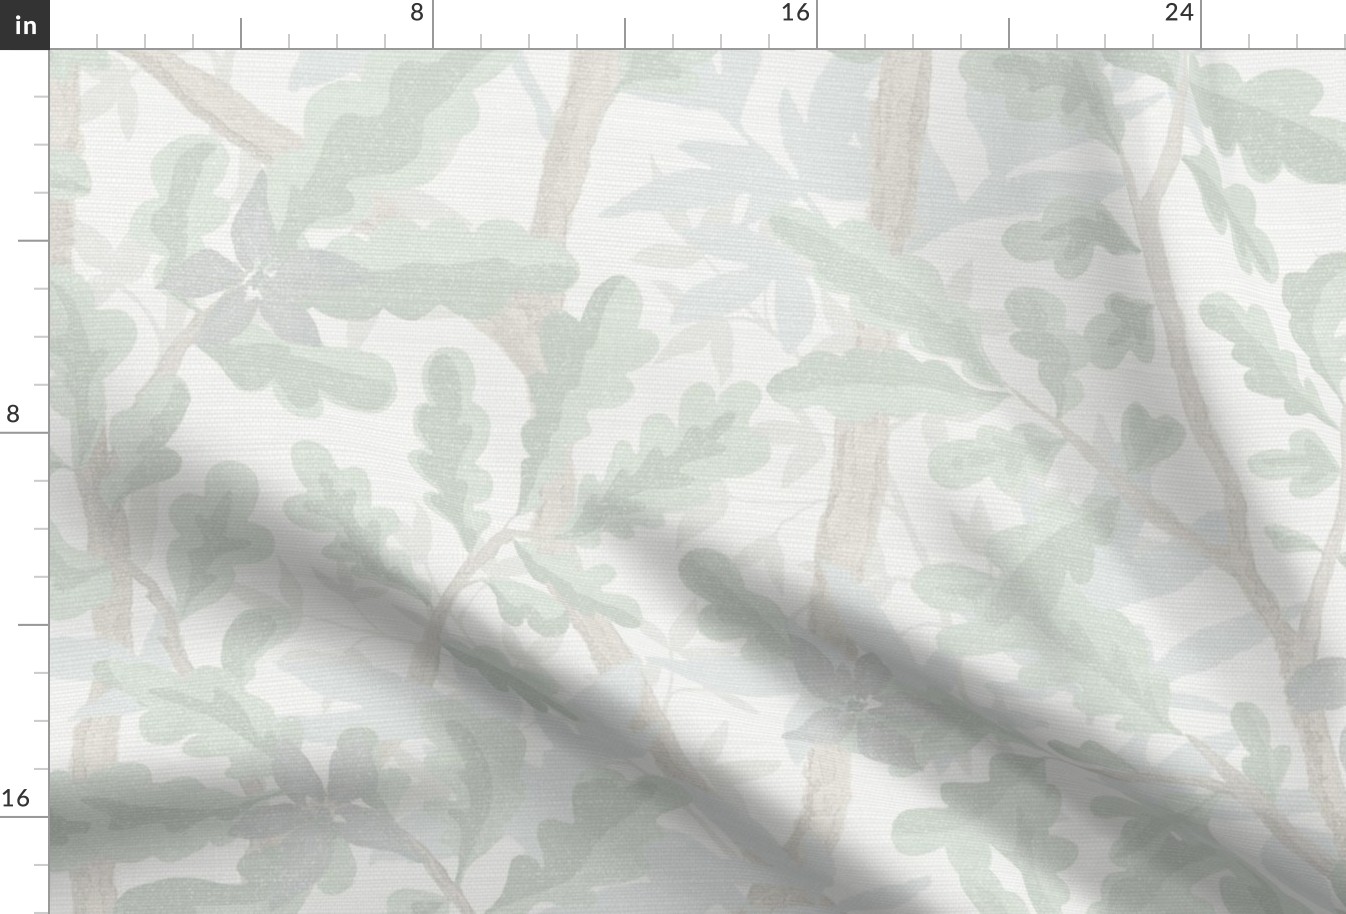 Woodlands in Faint Pastel greens